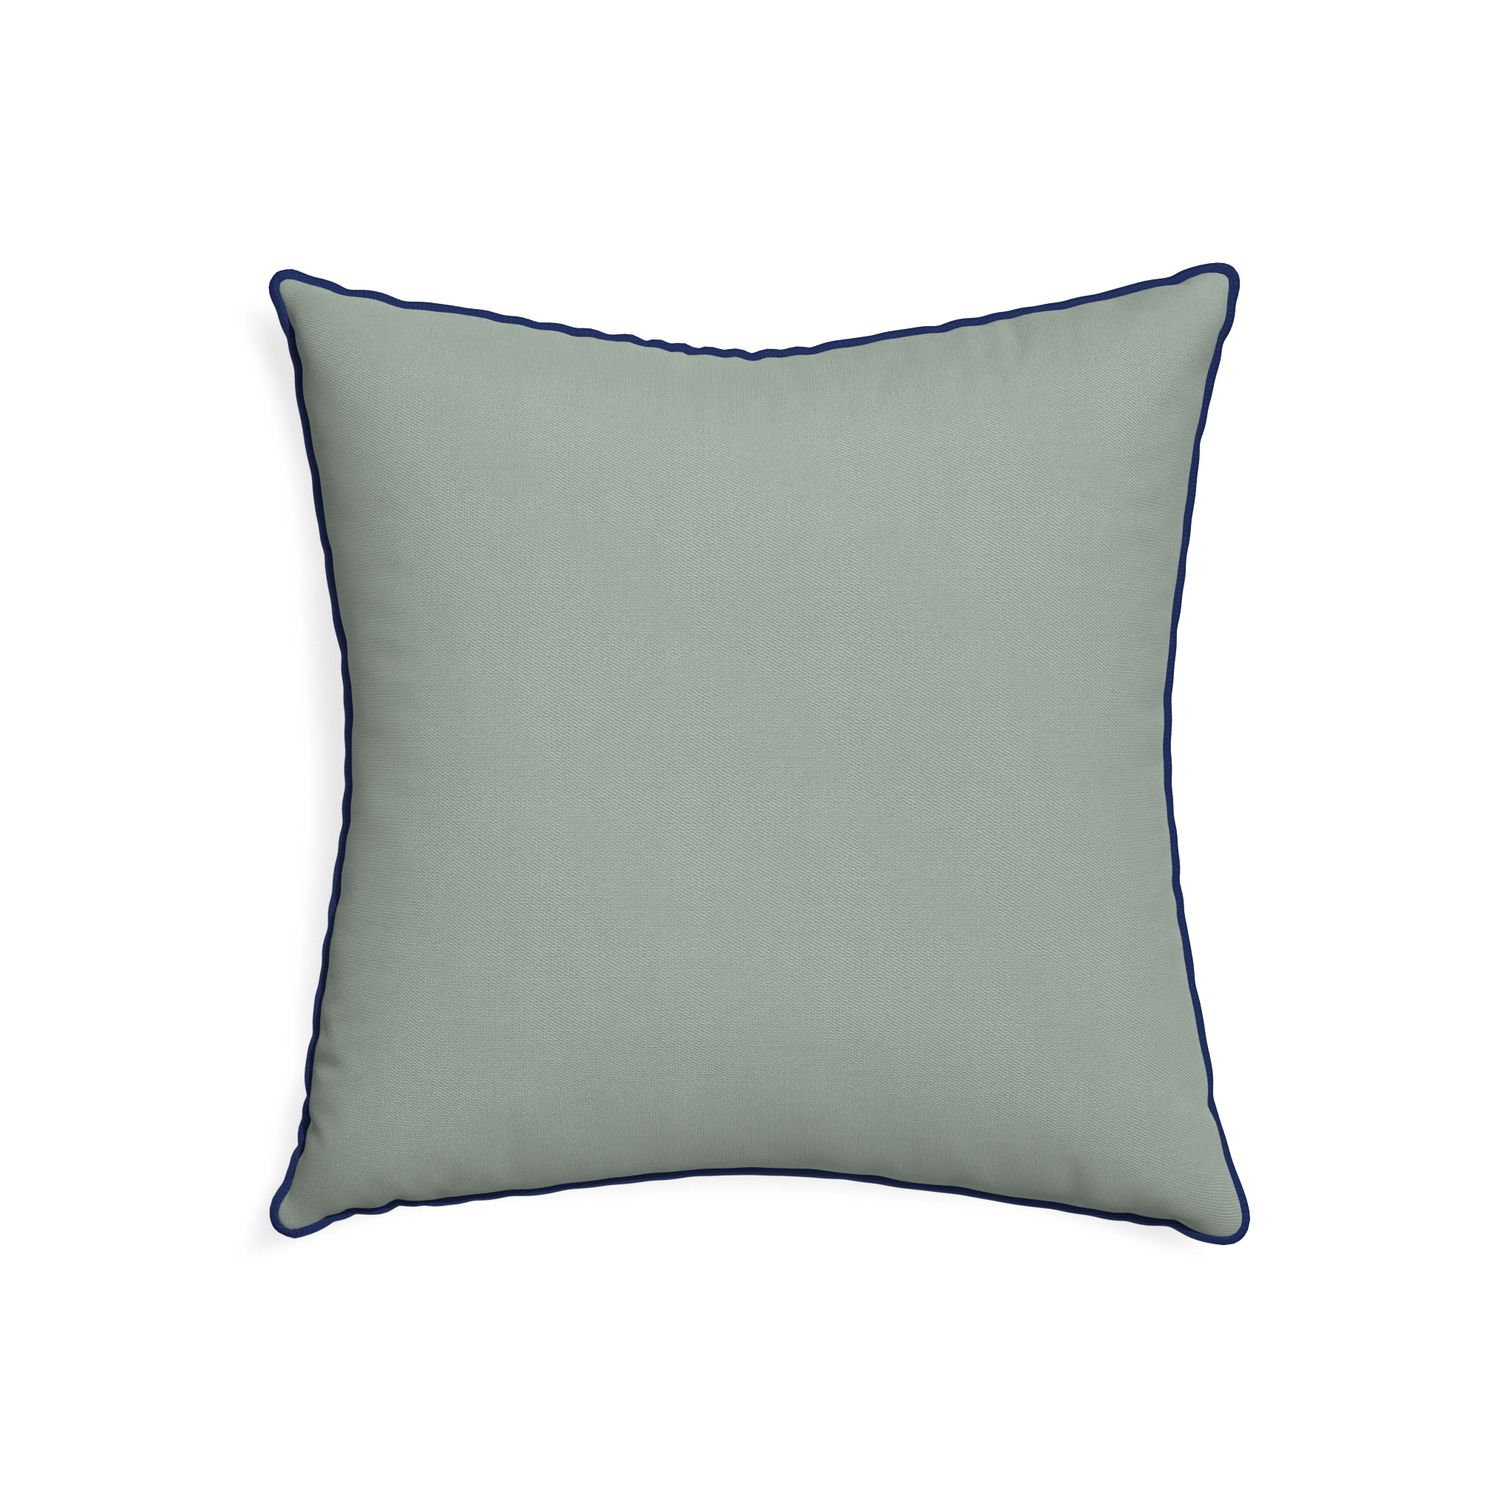 22-square sage custom pillow with midnight piping on white background